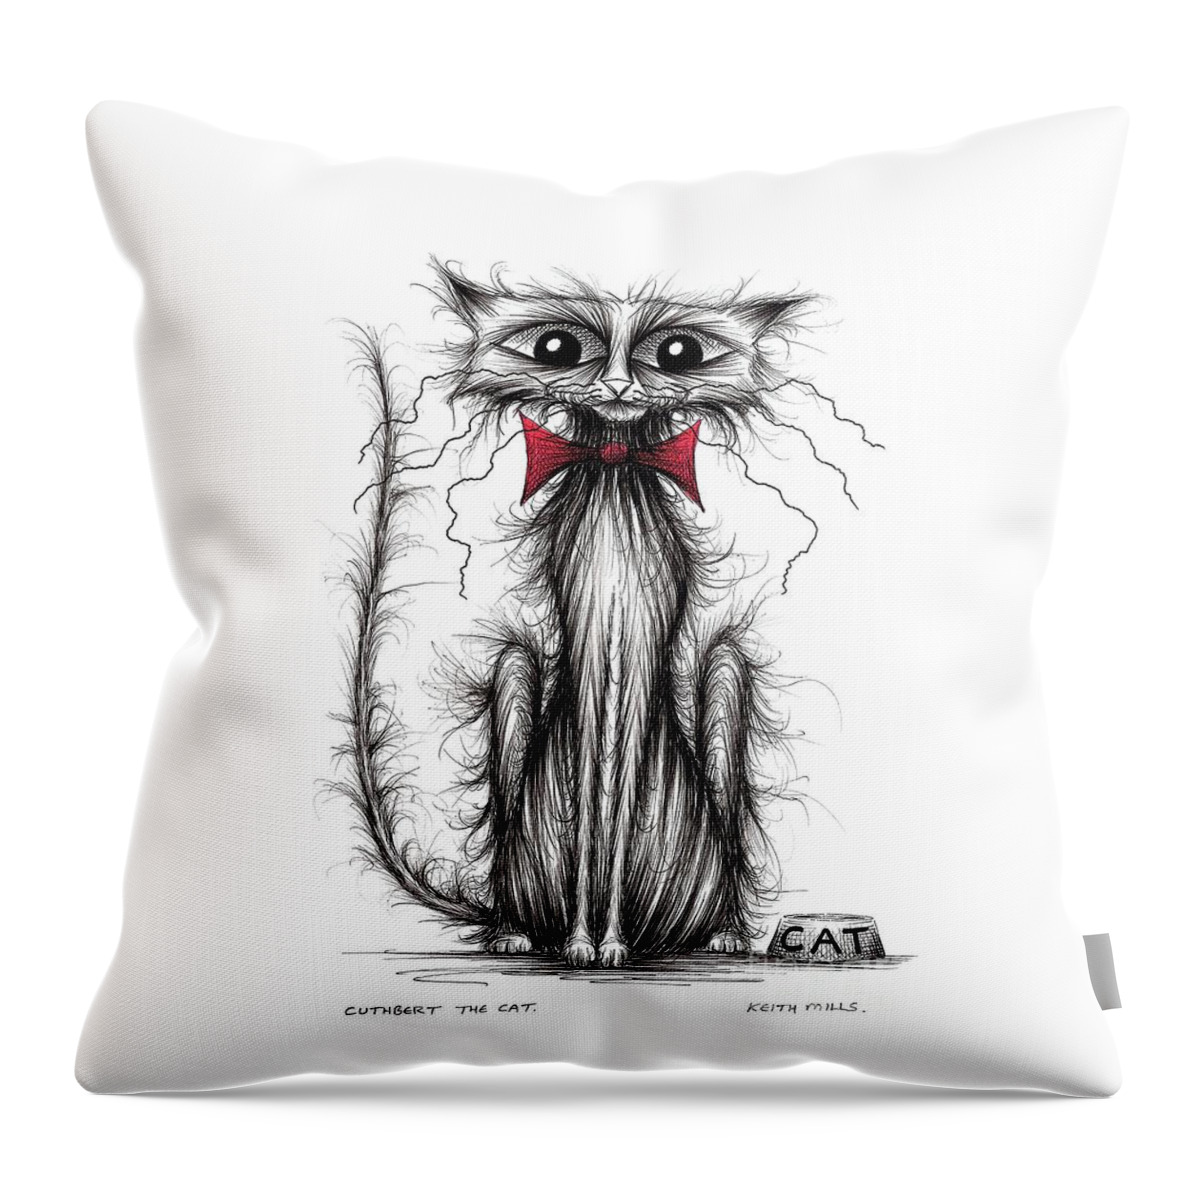 Thin Kitties Throw Pillow featuring the drawing Cuthbert the cat by Keith Mills